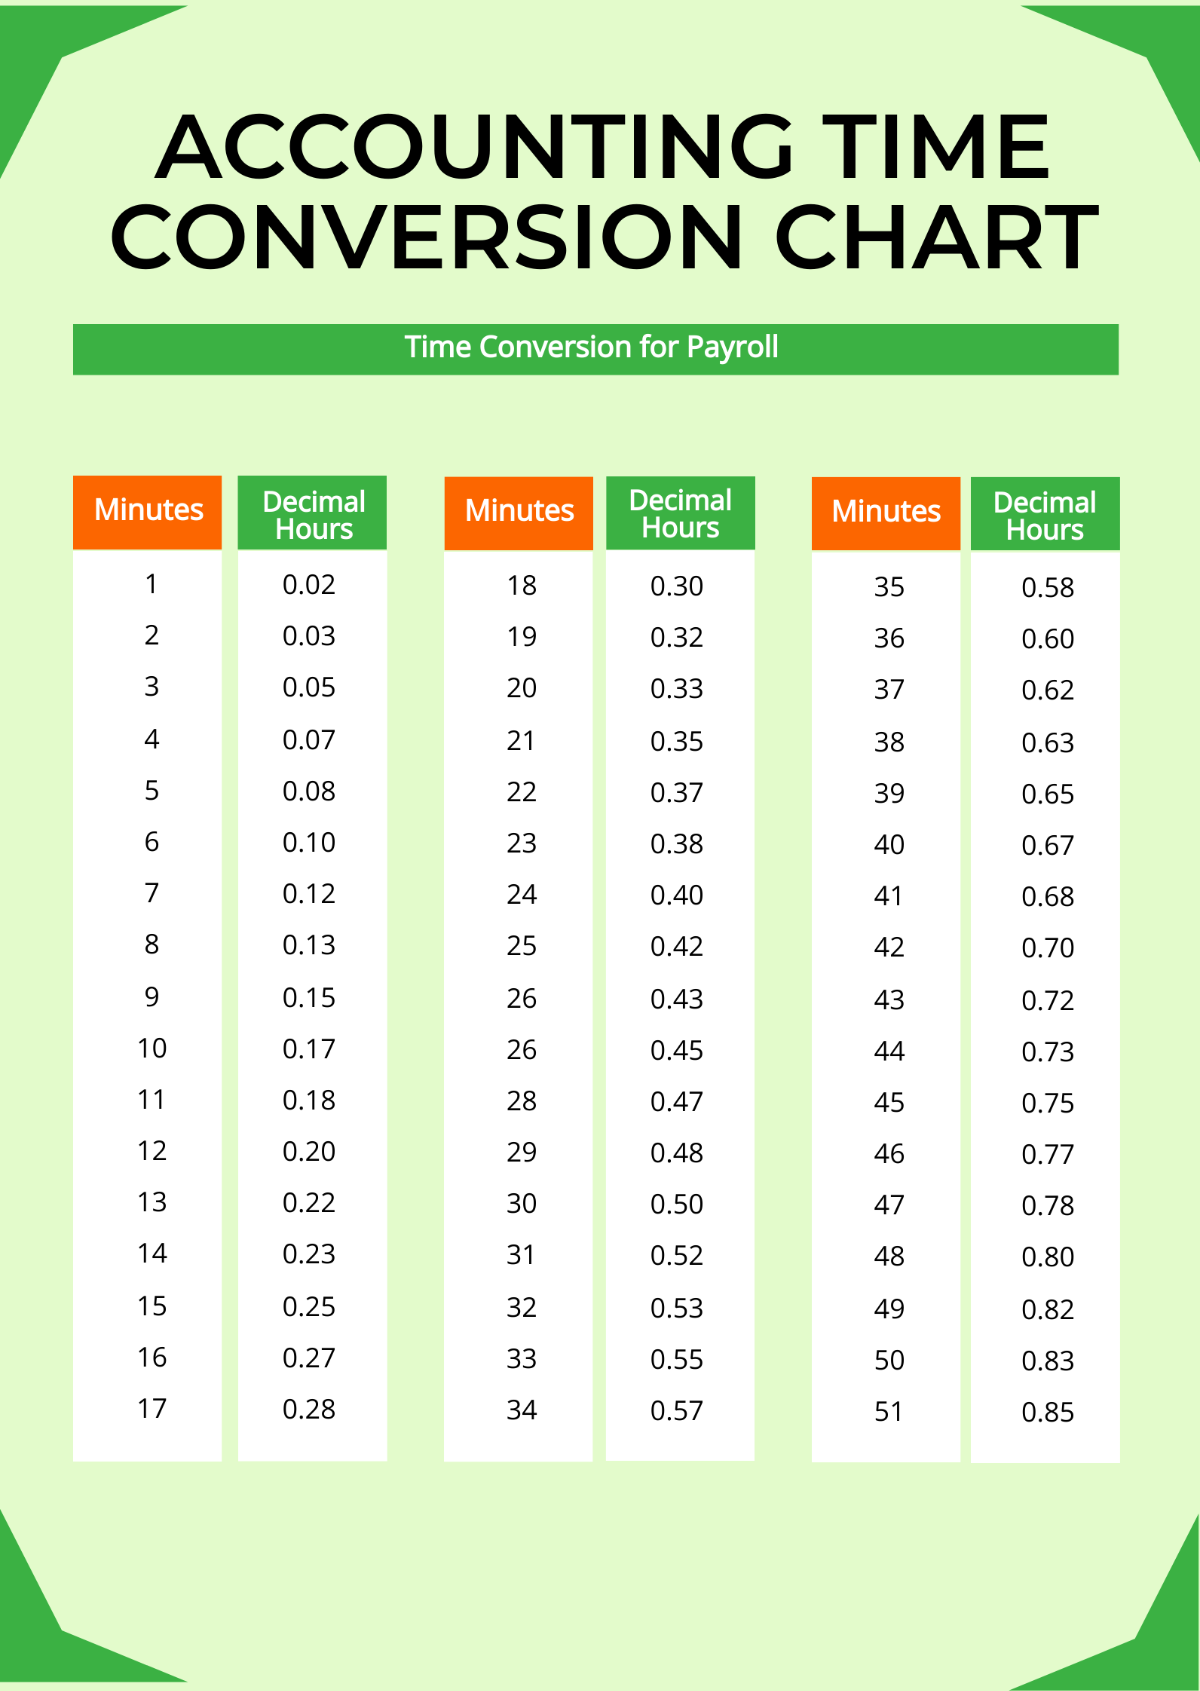 Accounting Time Conversion Chart